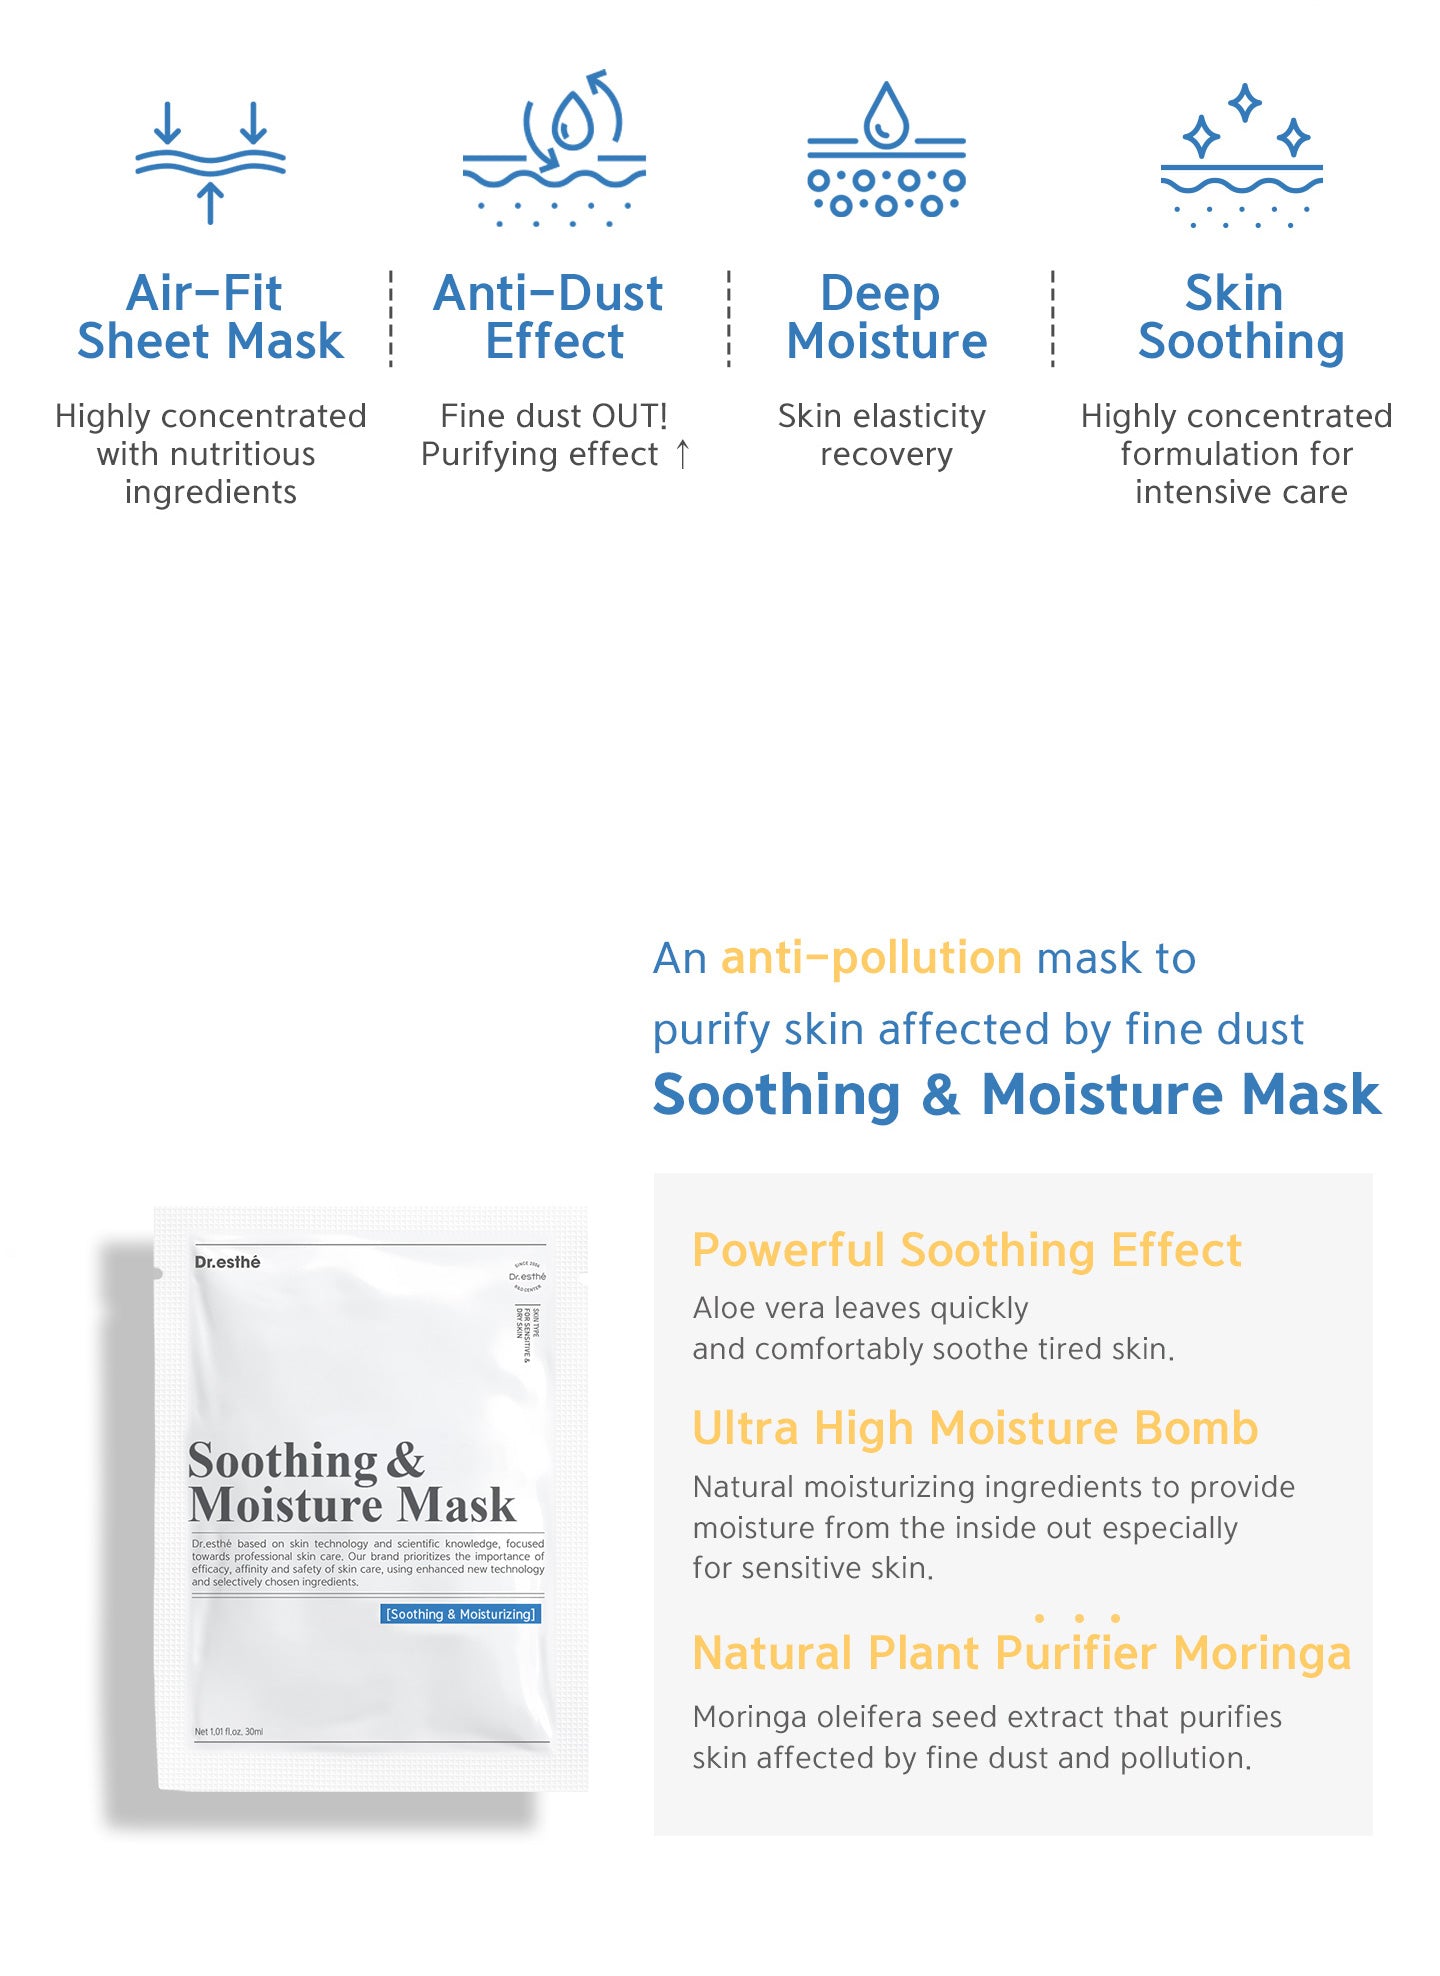 Air-fit sheet mask, anti-dust effect, deep moisture, skin soothing. An anti-pollution mask to purify skin affected by fine dust soothing & moisture mask. Powerful soothing effect, ultra high moisture bomb, natural plant purifier moringa. 